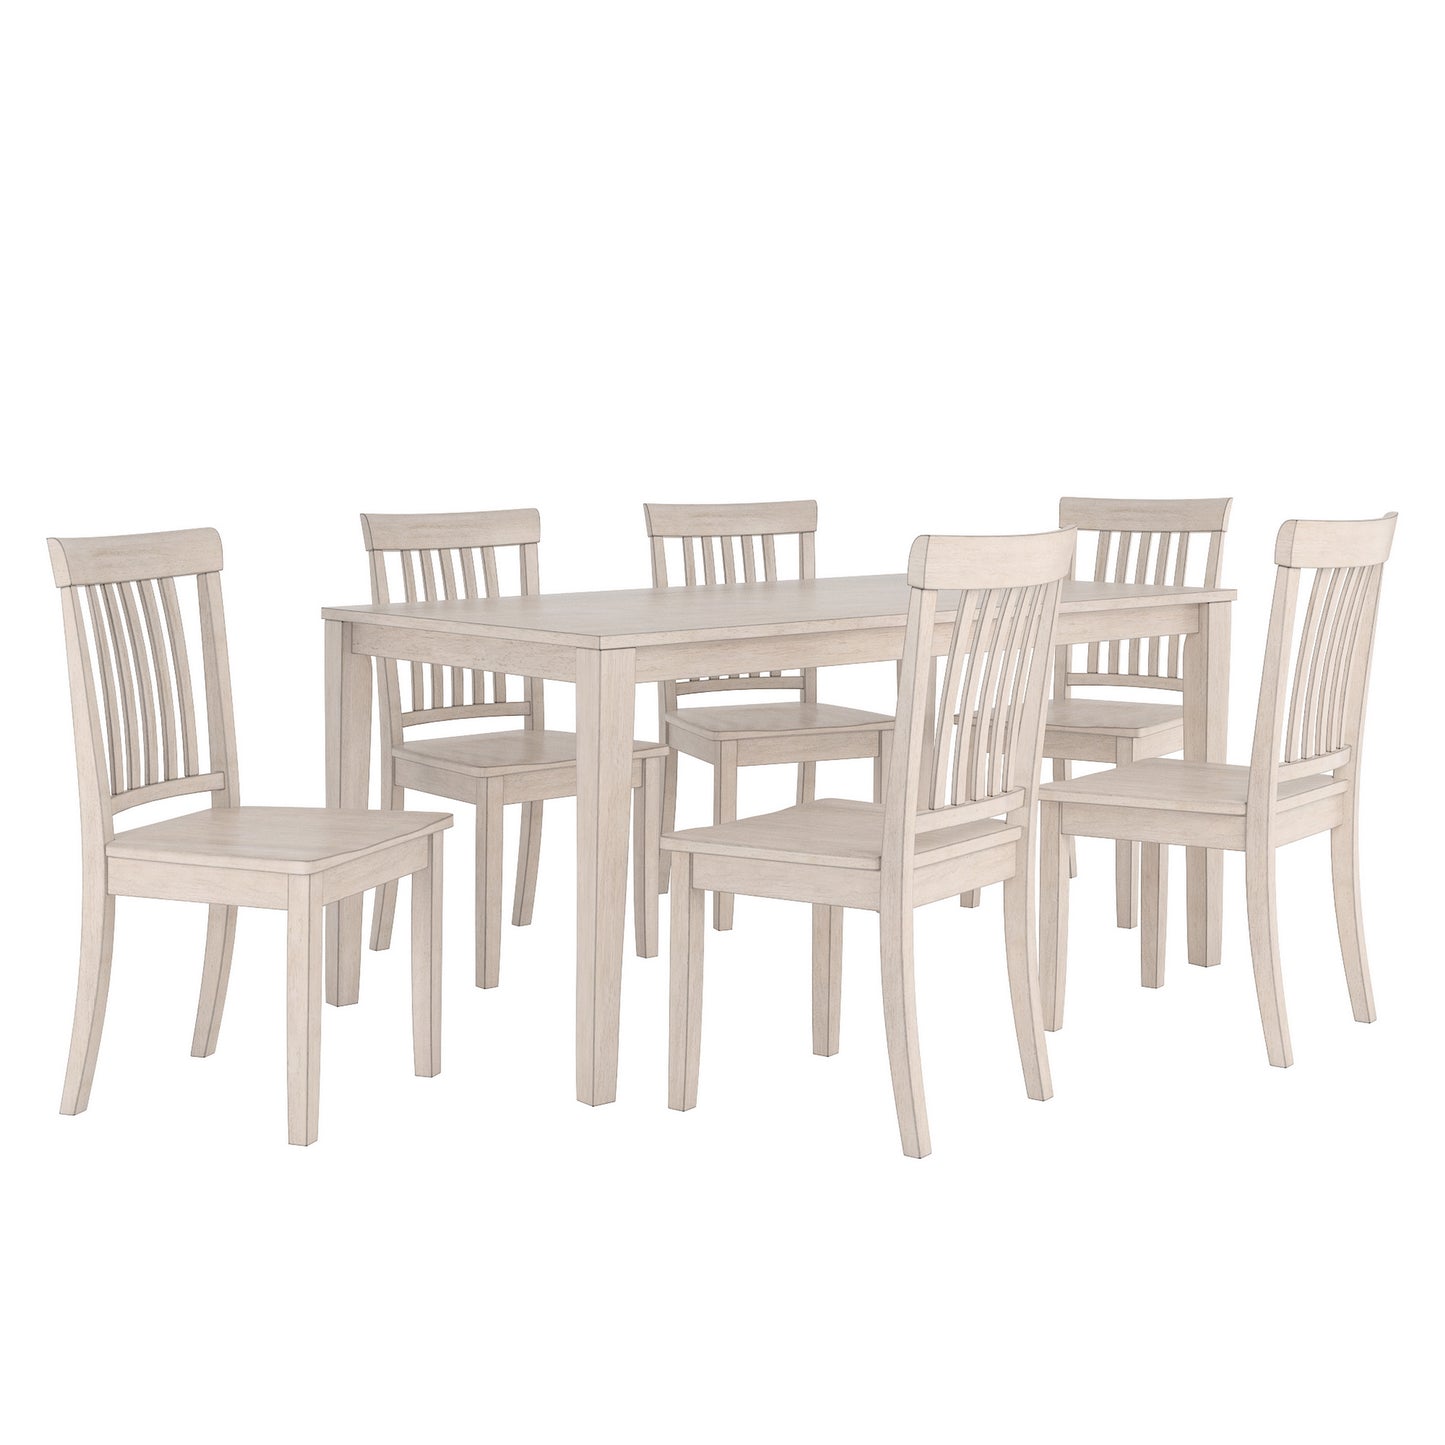 60-inch Rectangular Antique White Finish Dining Set - Mission Back Chairs, 7-Piece Set